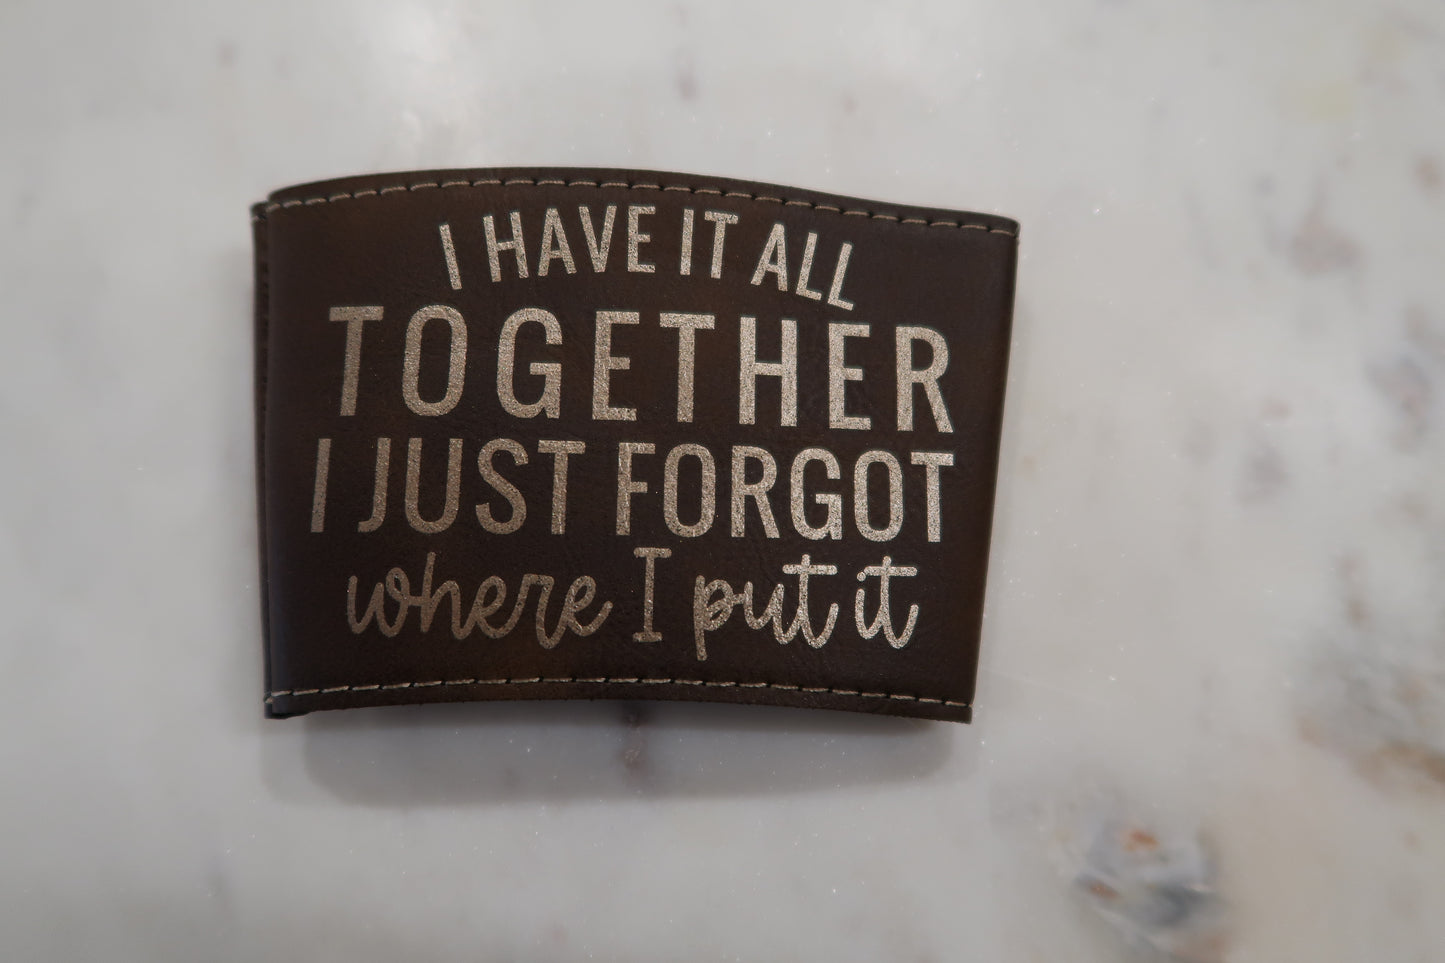 I have it all together coffee sleeve